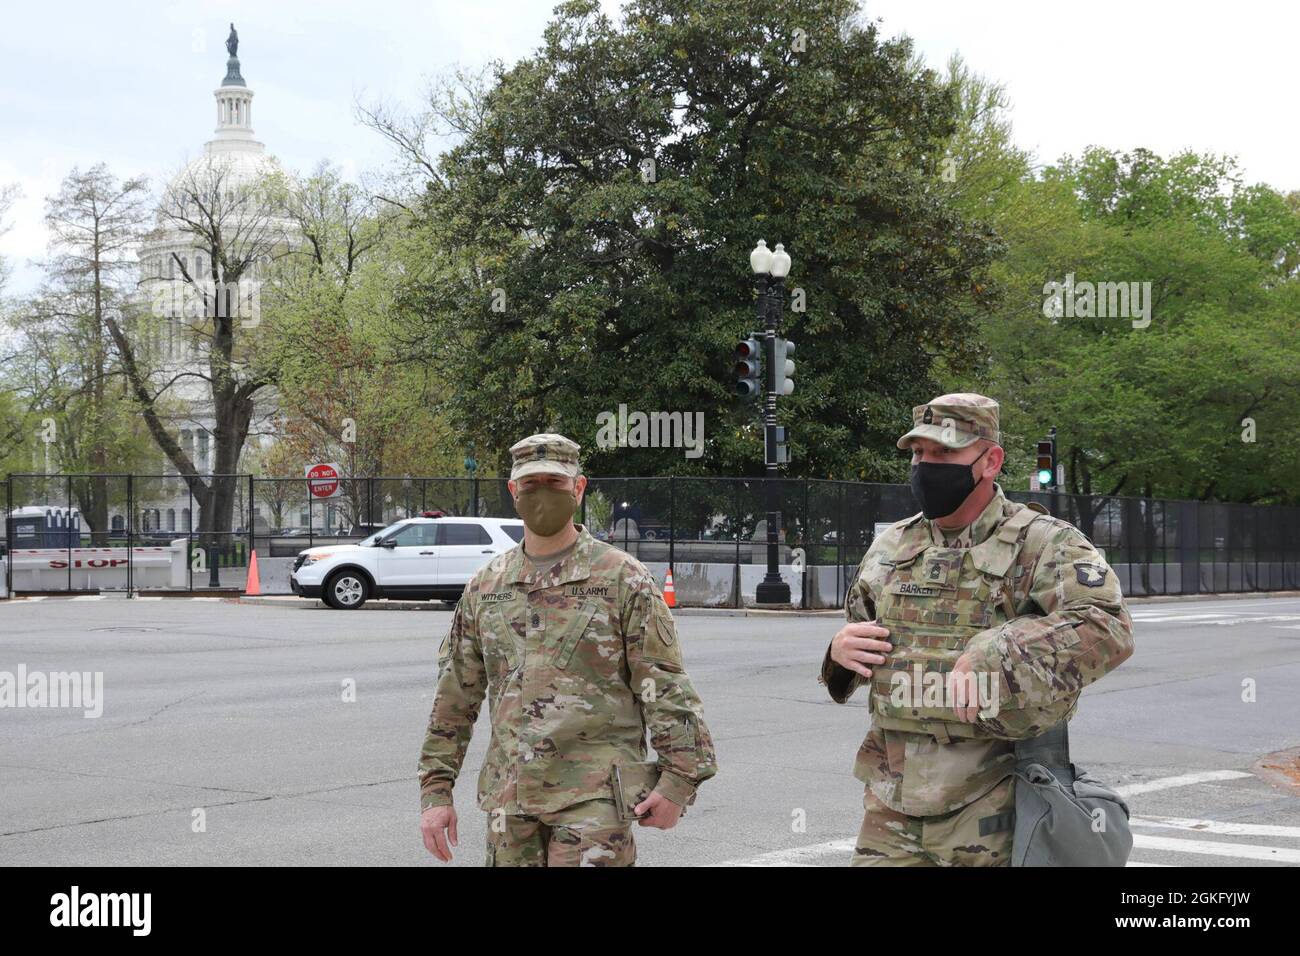 U.S. Army Command Sgt. Maj. Jesse Withers, left, state command sergeant major, Kentucky National Guard, and Master Sgt. Joshua Barker, acting first sergeant of Task Force Legion, 101st Main Command Post Operational Detachment, patrol near the U.S. Capitol in Washington, D.C., April 12, 2021. The National Guard has been requested to continue supporting federal law enforcement agencies with security, communications, medical evacuation, logistics, and safety support to state, district and federal agencies through mid-May. Stock Photo